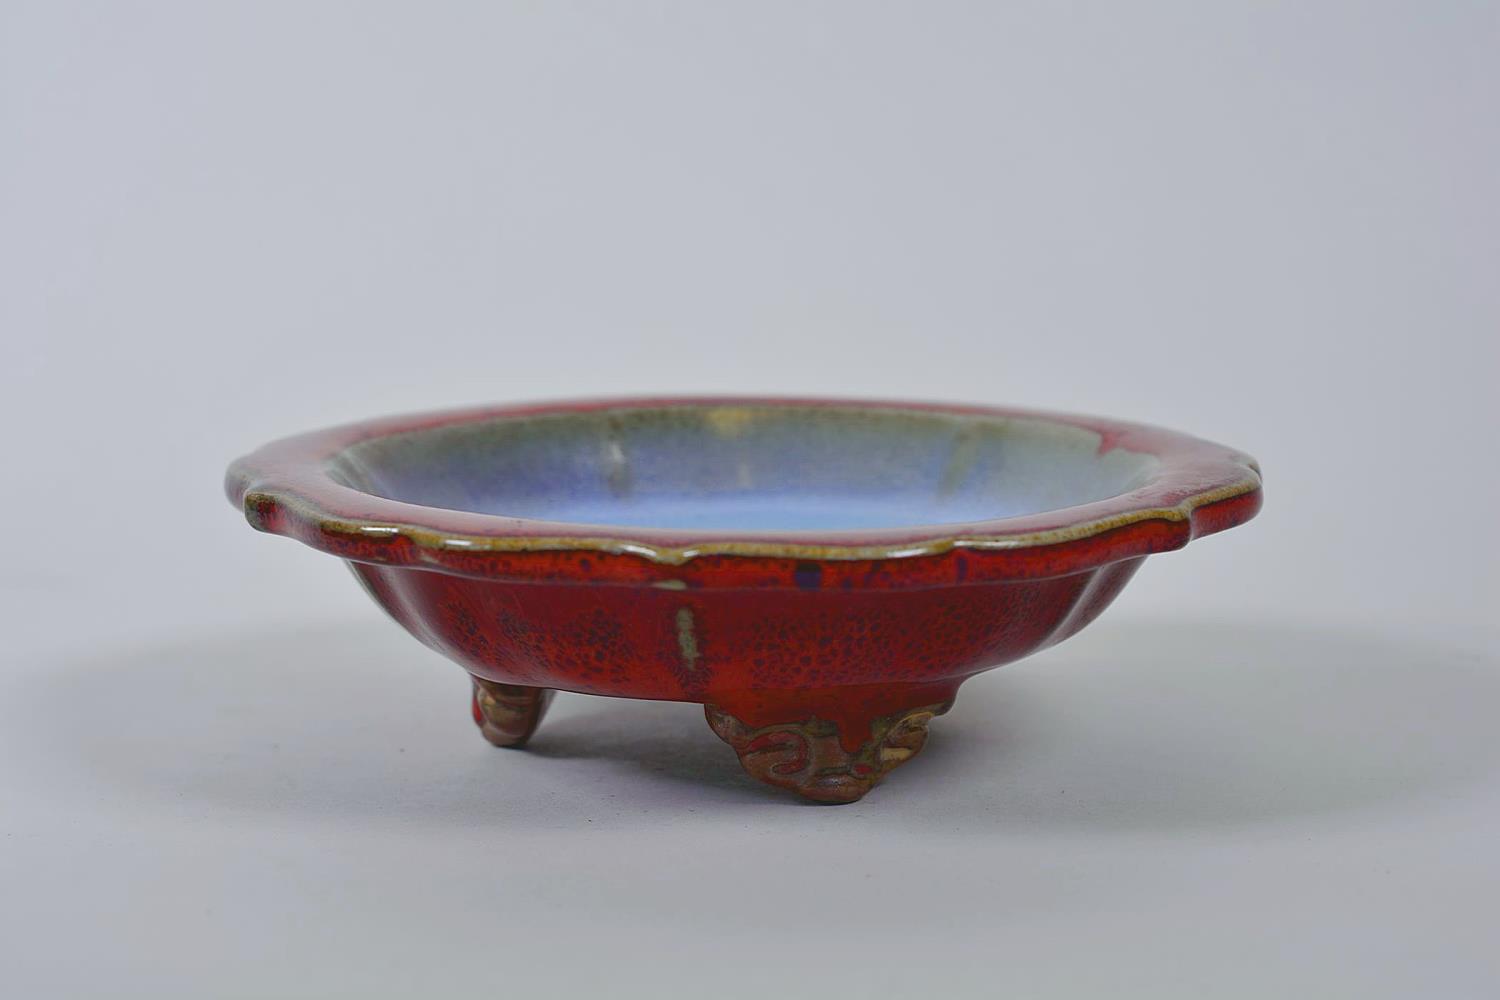 A Chinese Jun ware dish on tripod feet with a lobed rim and flambé glaze, mark to base, 6½" diameter - Image 5 of 7